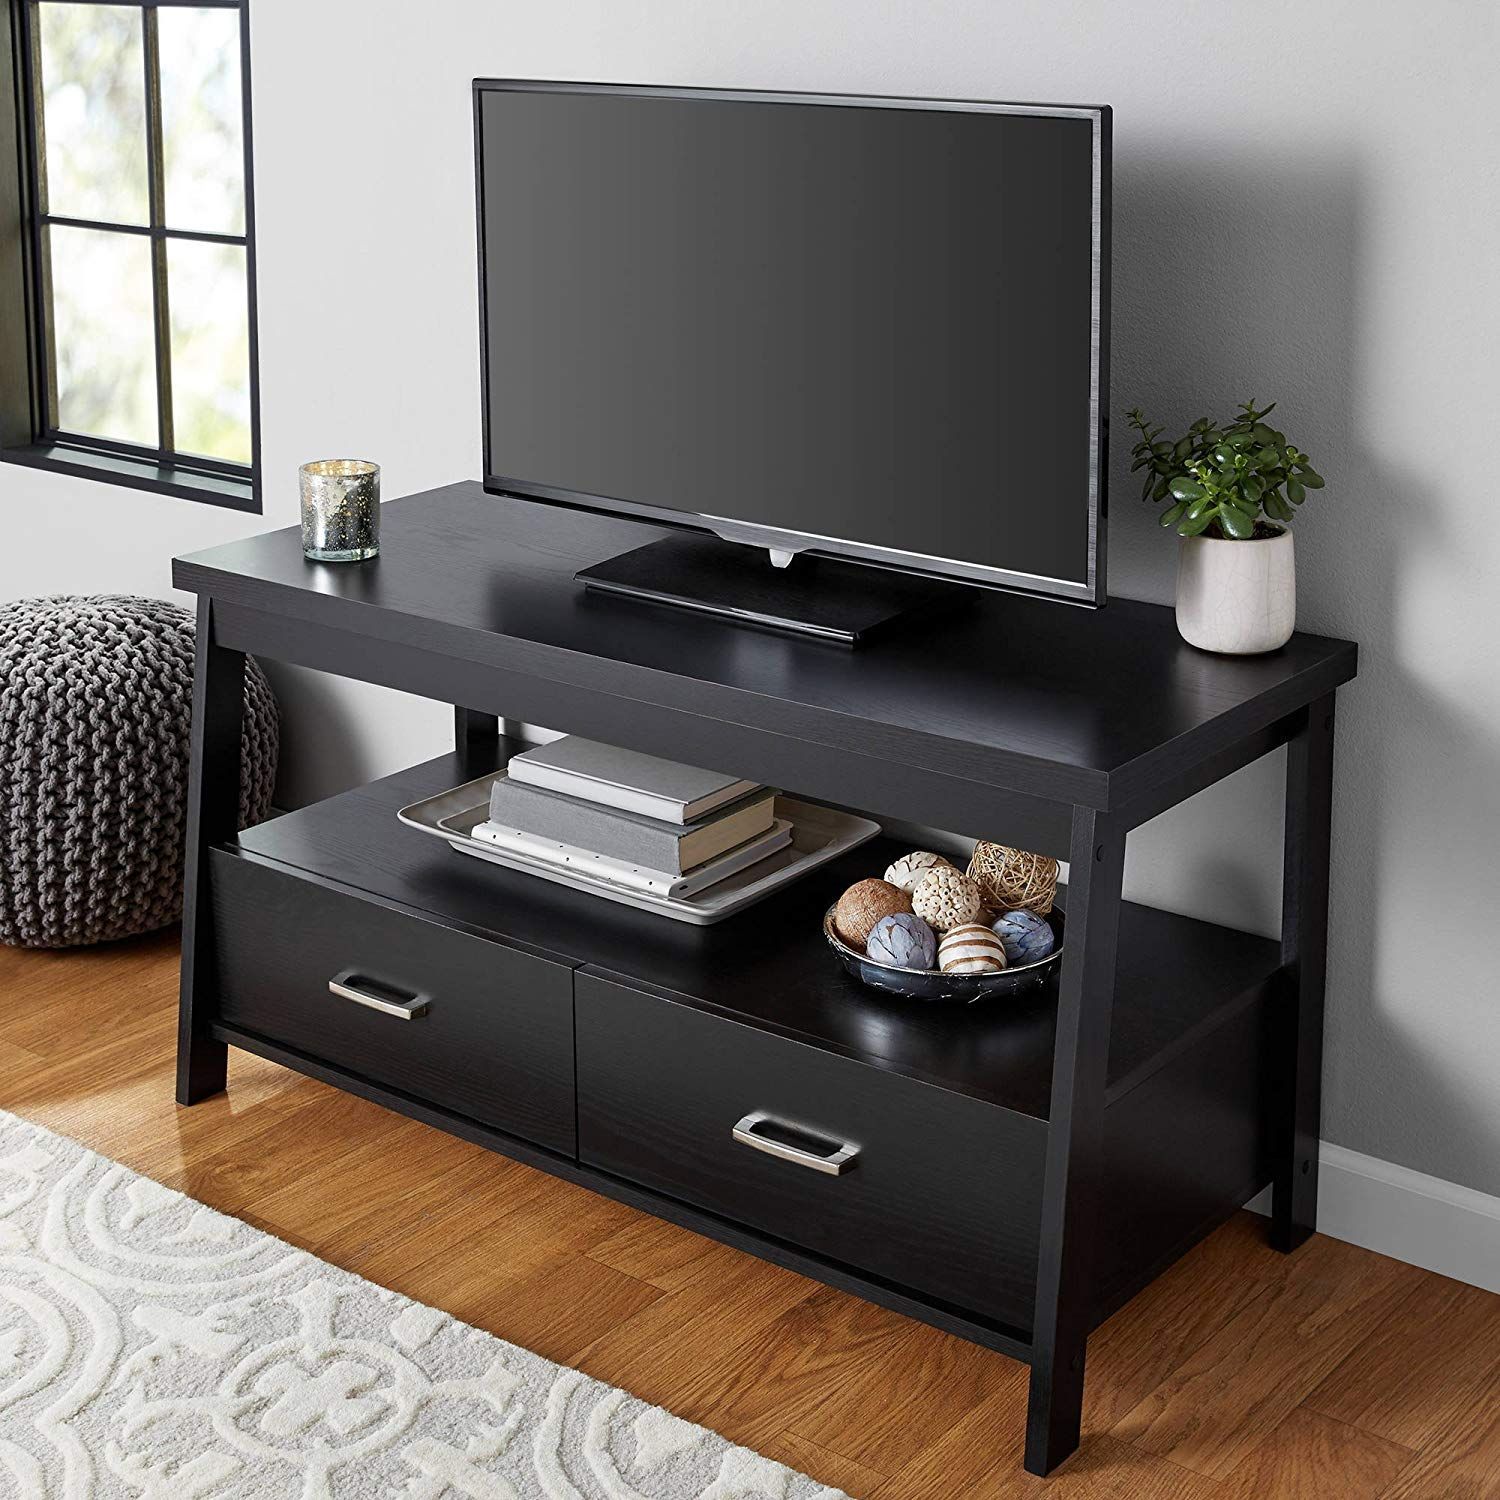 Mainstays Logan Tv Stand For Flat Screen Tvs Up To 47 And For Oak Tv Stands For Flat Screen (View 6 of 15)